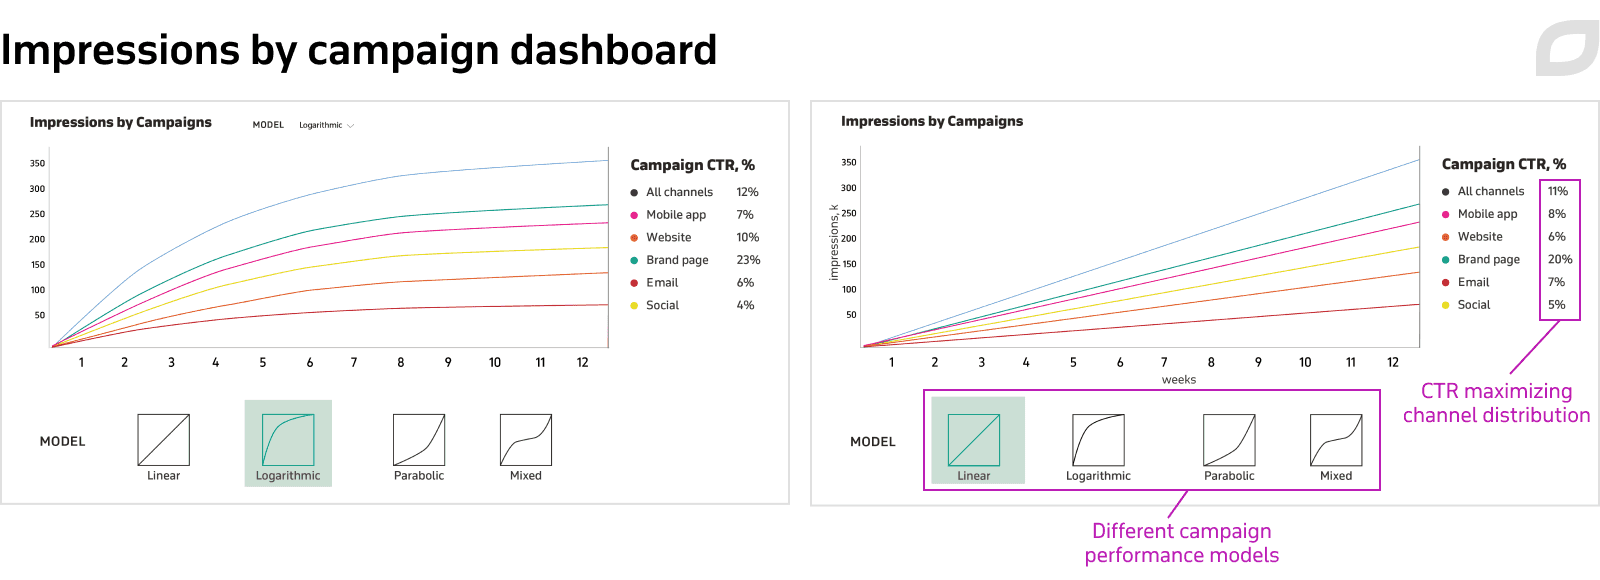 Impressions by campaign dashboard